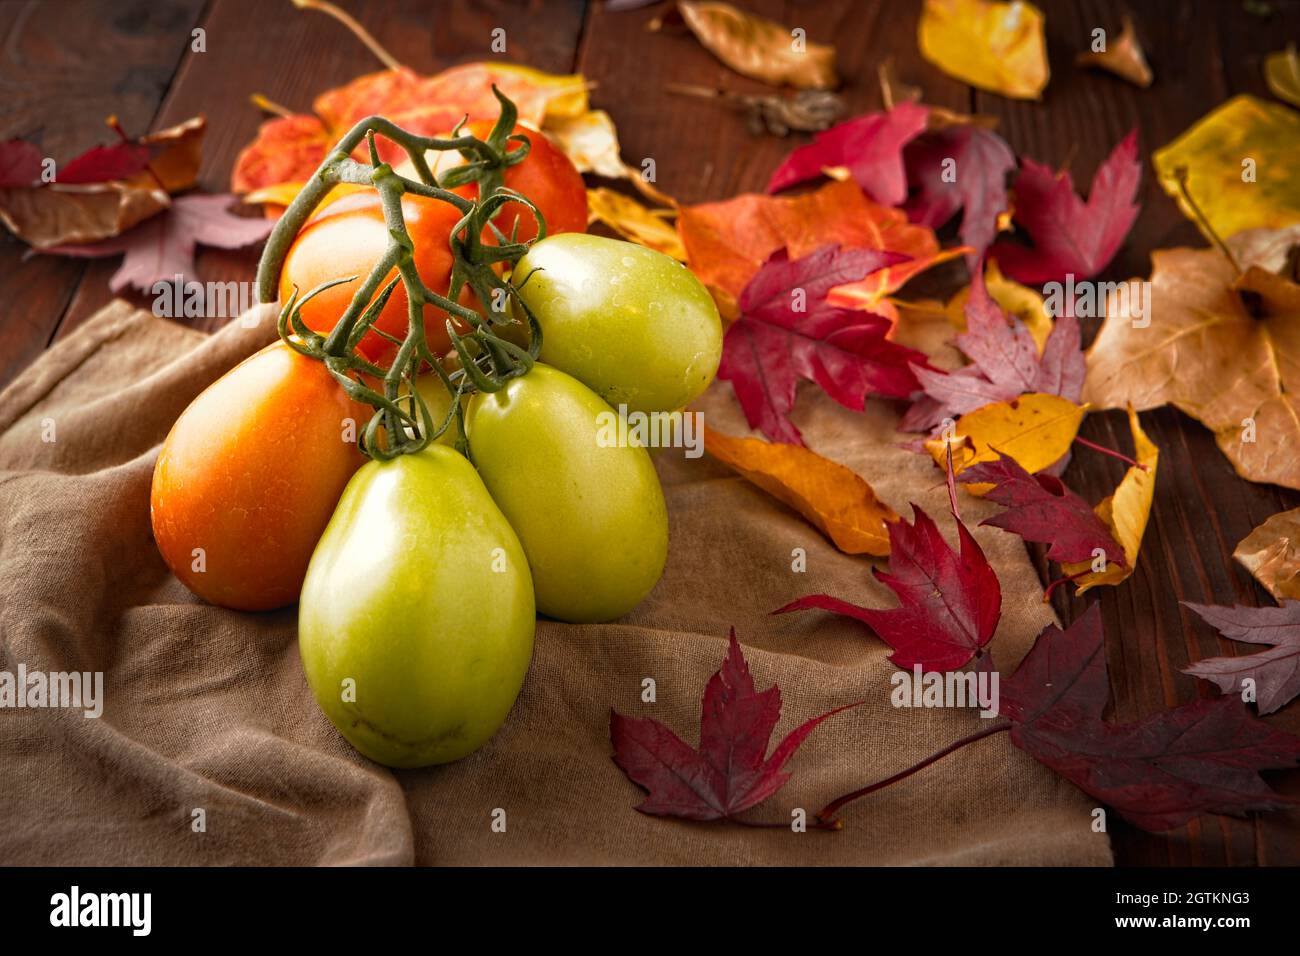 https://c8.alamy.com/comp/2GTKNG3/a-studio-photo-of-ripening-roma-tomatoes-and-autumn-leaves-2GTKNG3.jpg